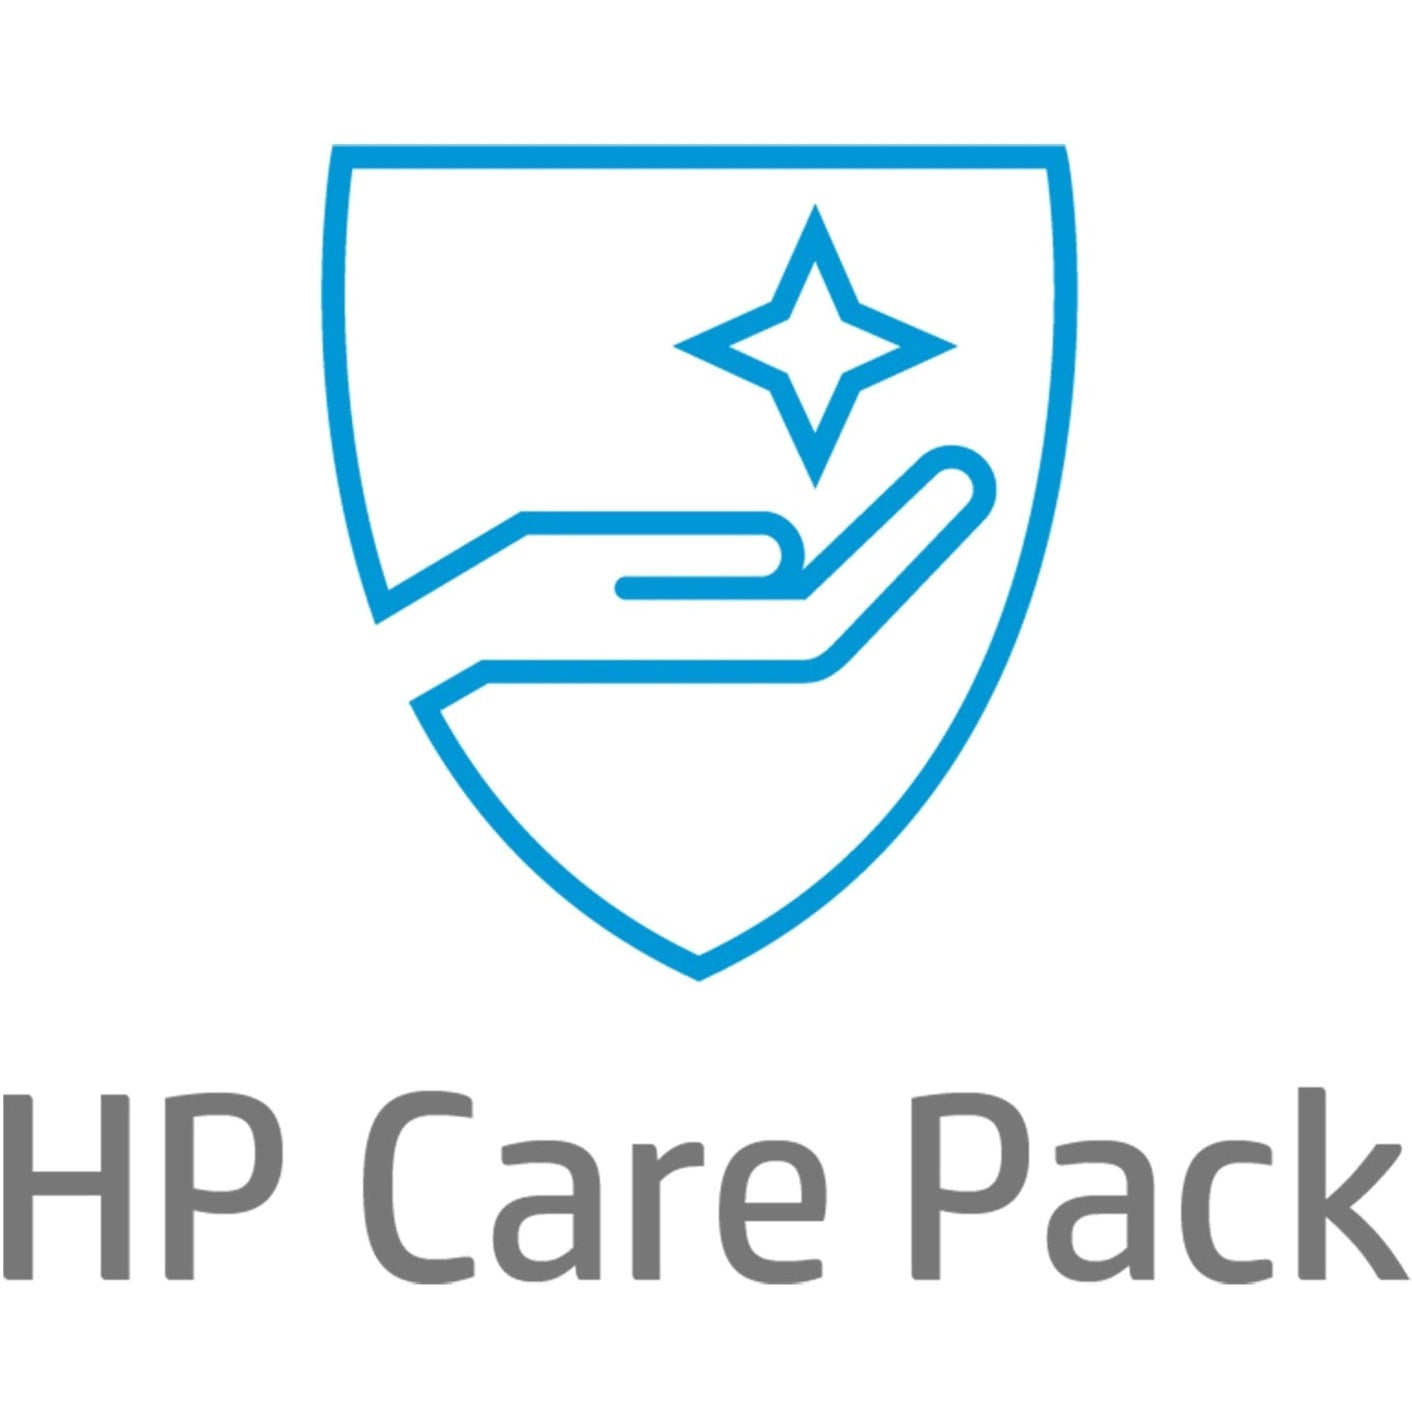 HP Care Pack Hardware Support - Post Warranty - 1 Year - Warranty (UC1P6PE)